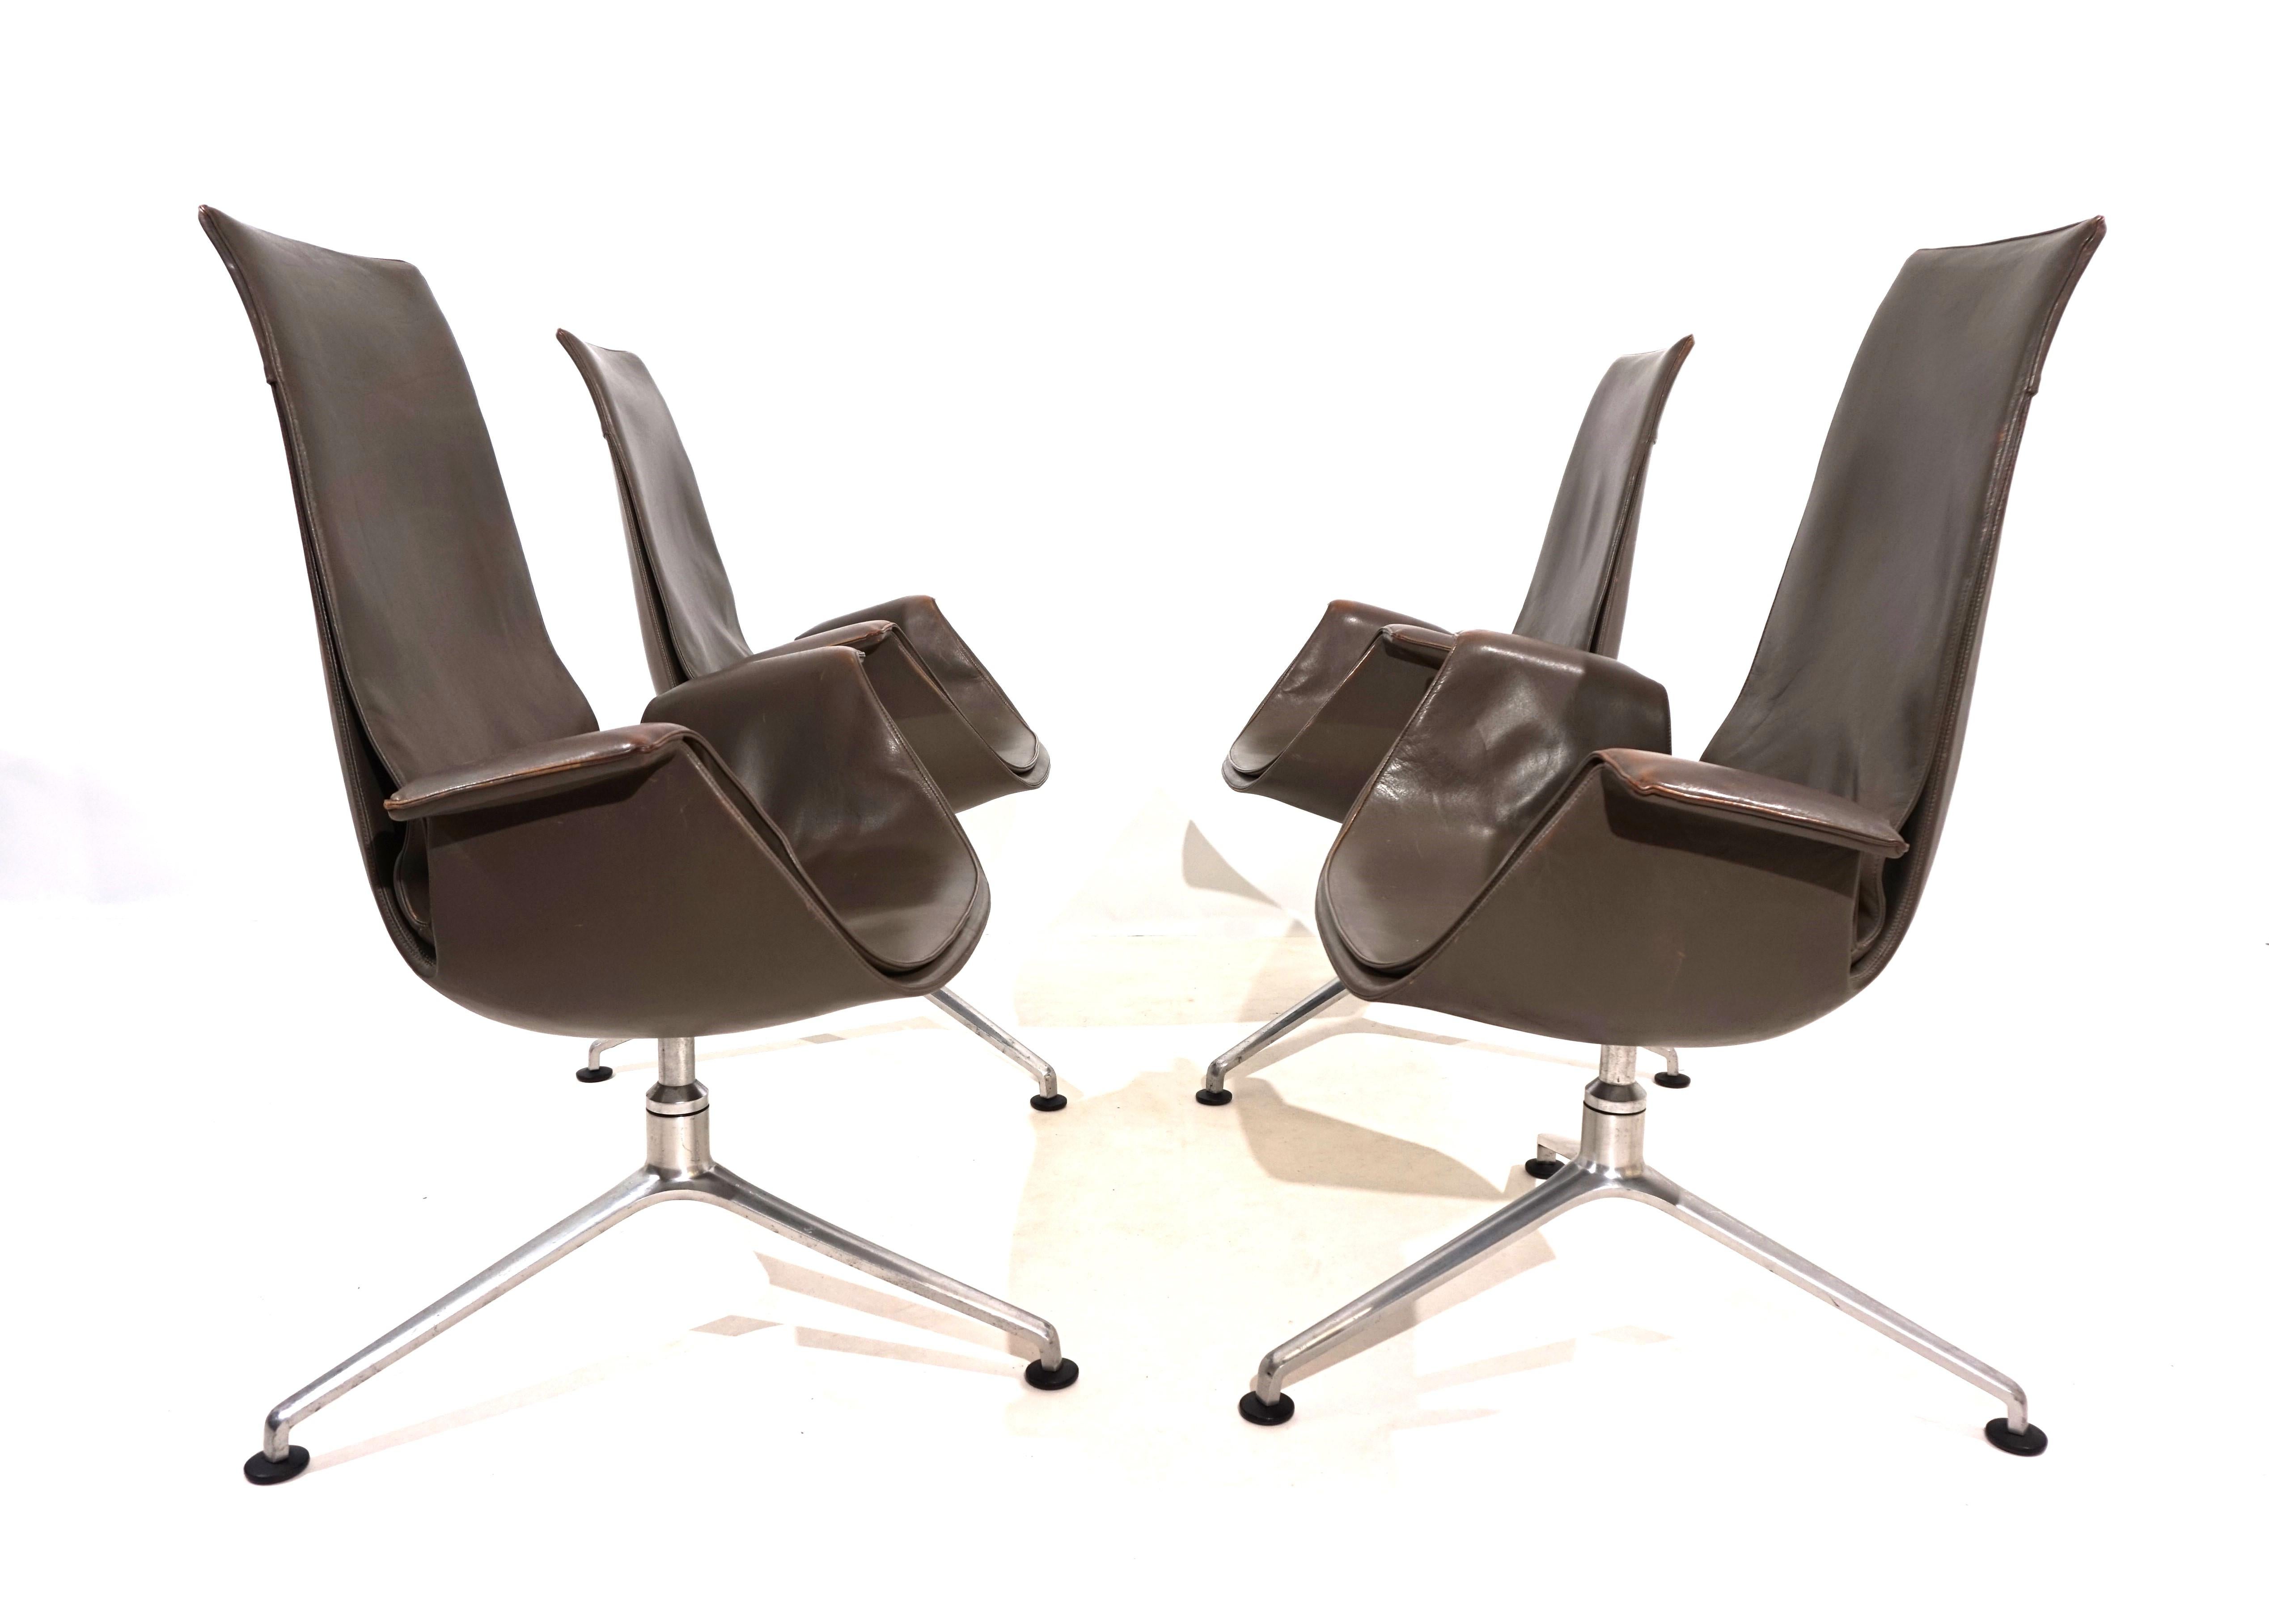 The set of 4 elegant FK 6725 Bird chairs with high backrests is in very good condition. The taupe-colored leather of the chairs shows hardly any signs of wear and has a charming patina on the armrests. One chair has rubbed through the leather at the